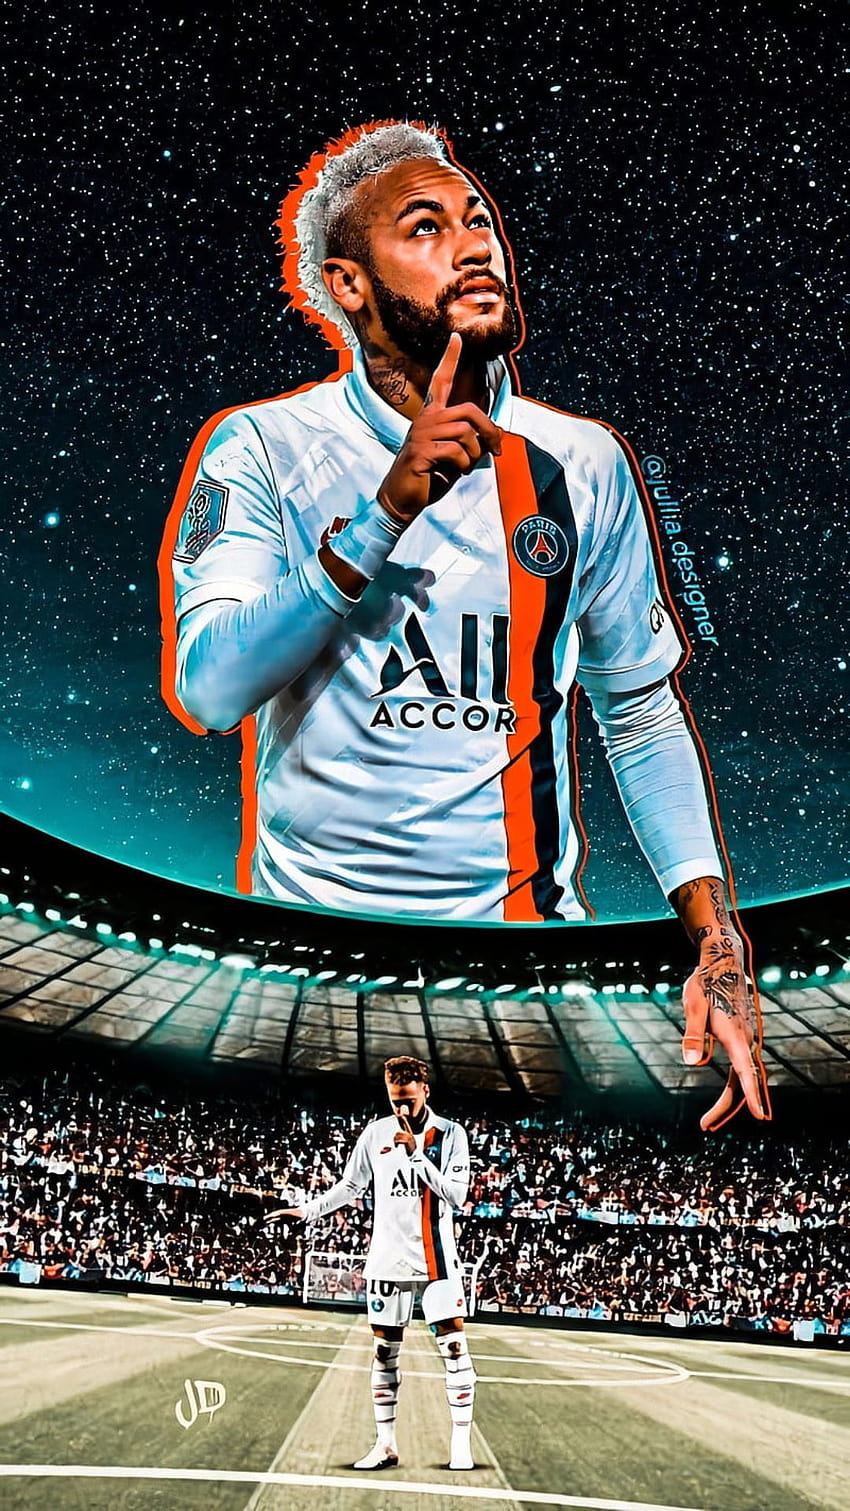 Page 53, neymar and HD wallpapers